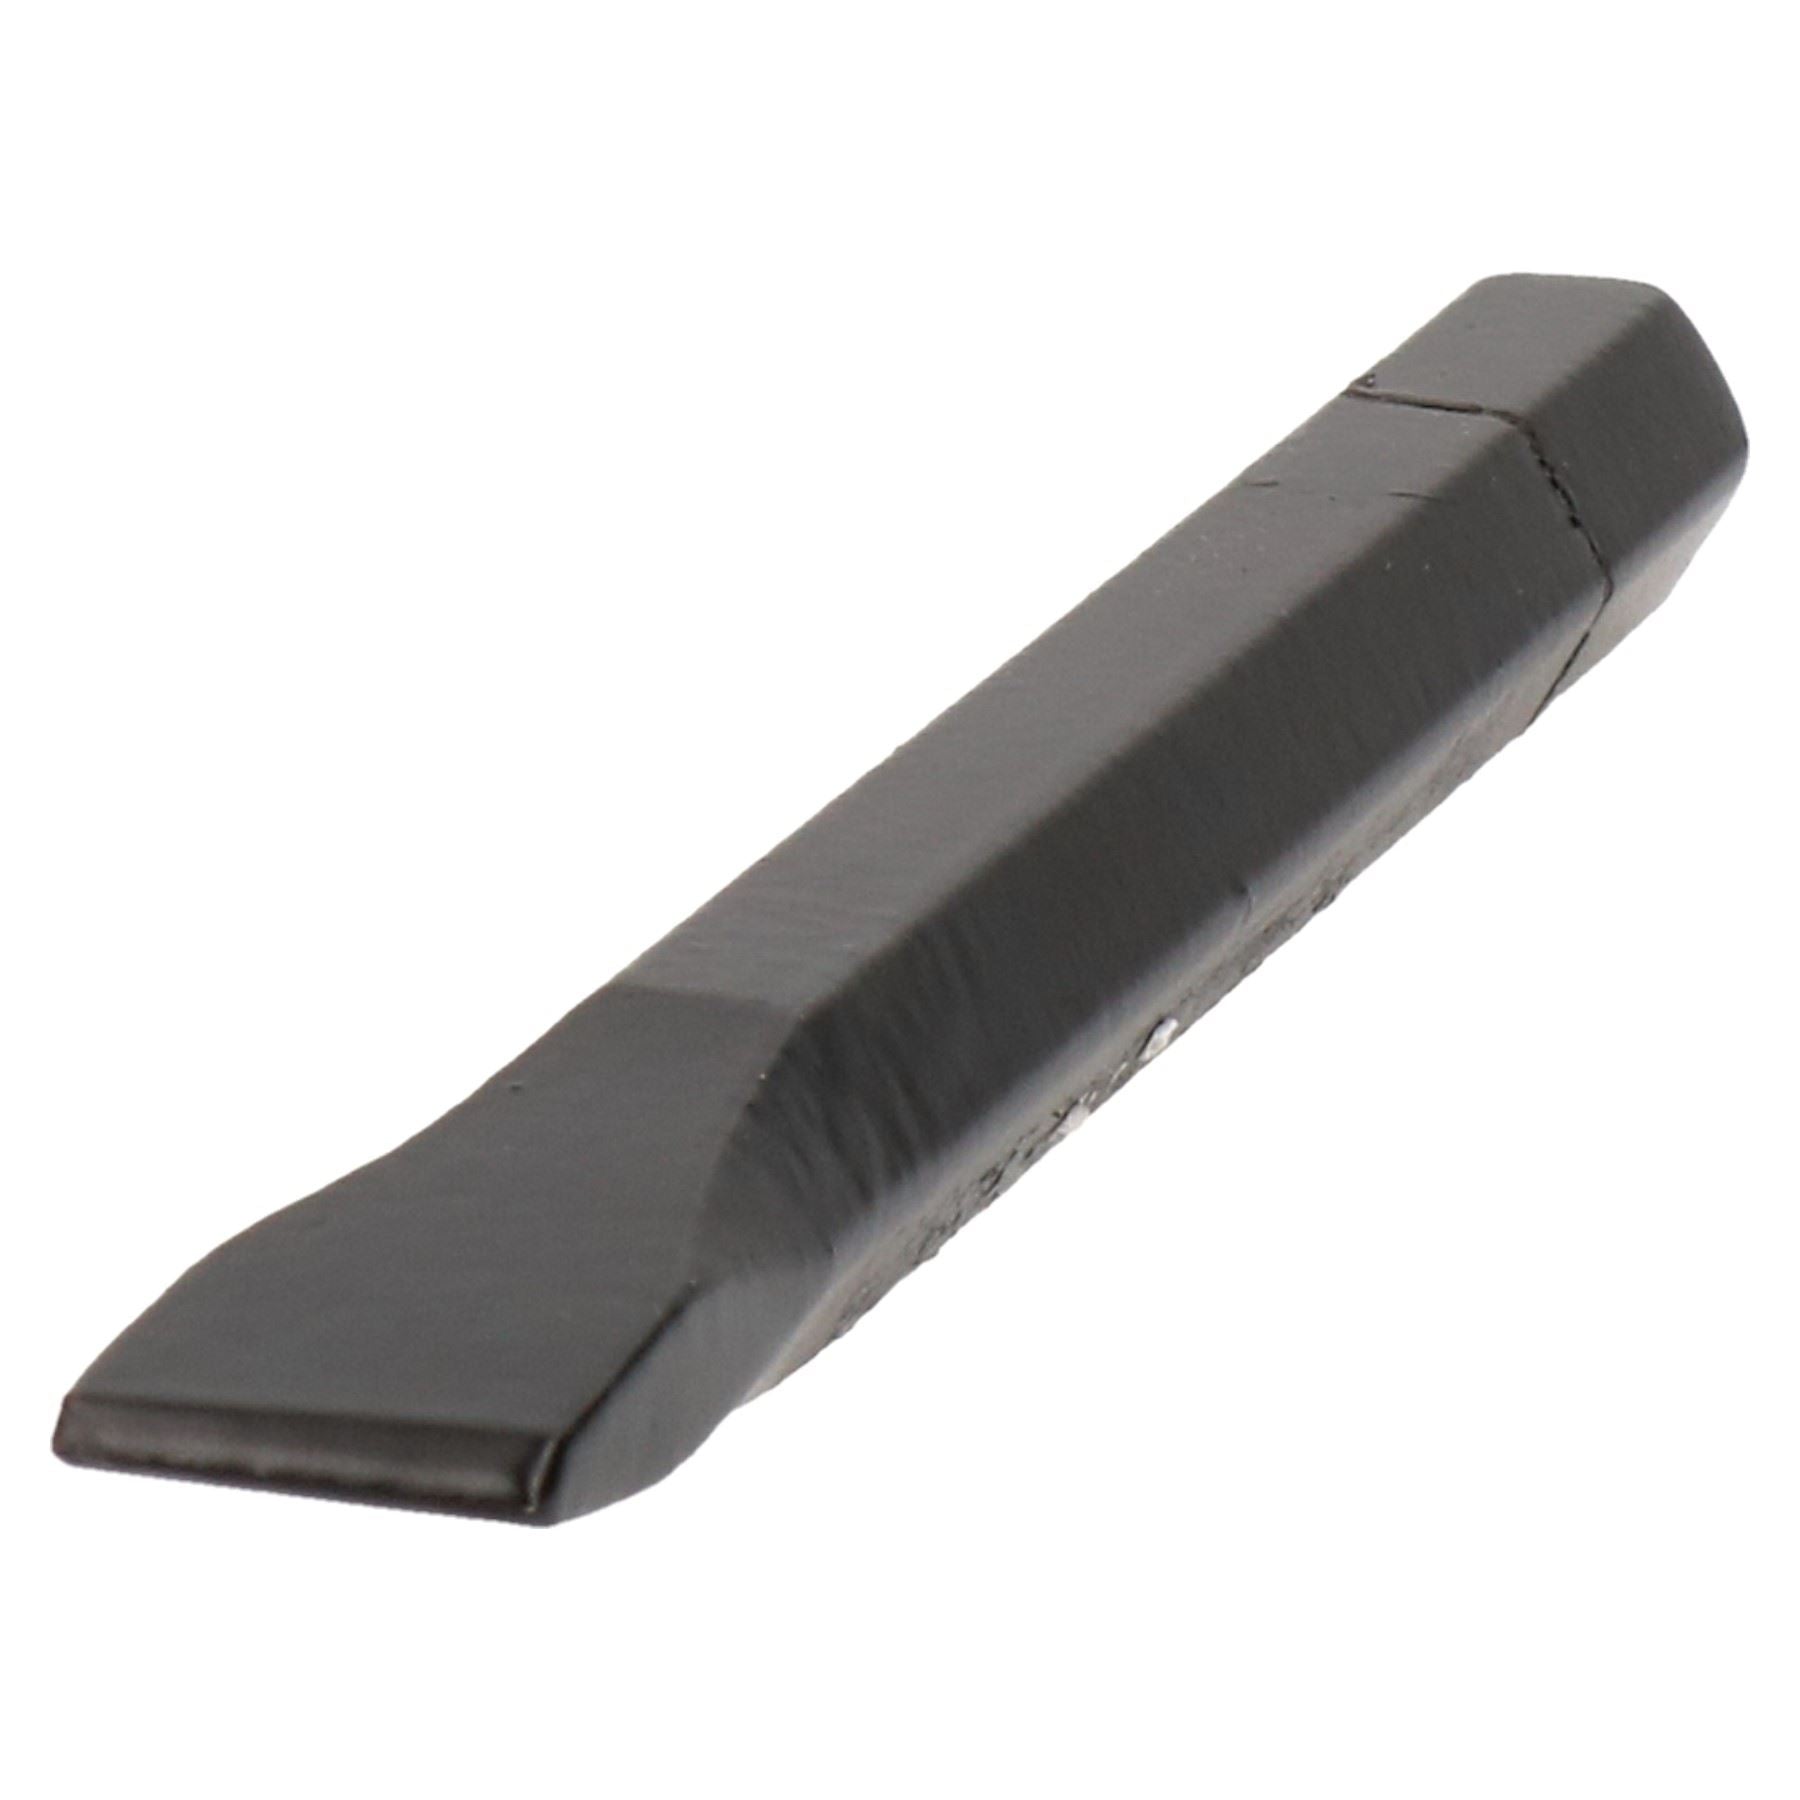 6" x 1/2" Black Cold Chisel Hardened Steel Constant For Brick Stone Block Steel